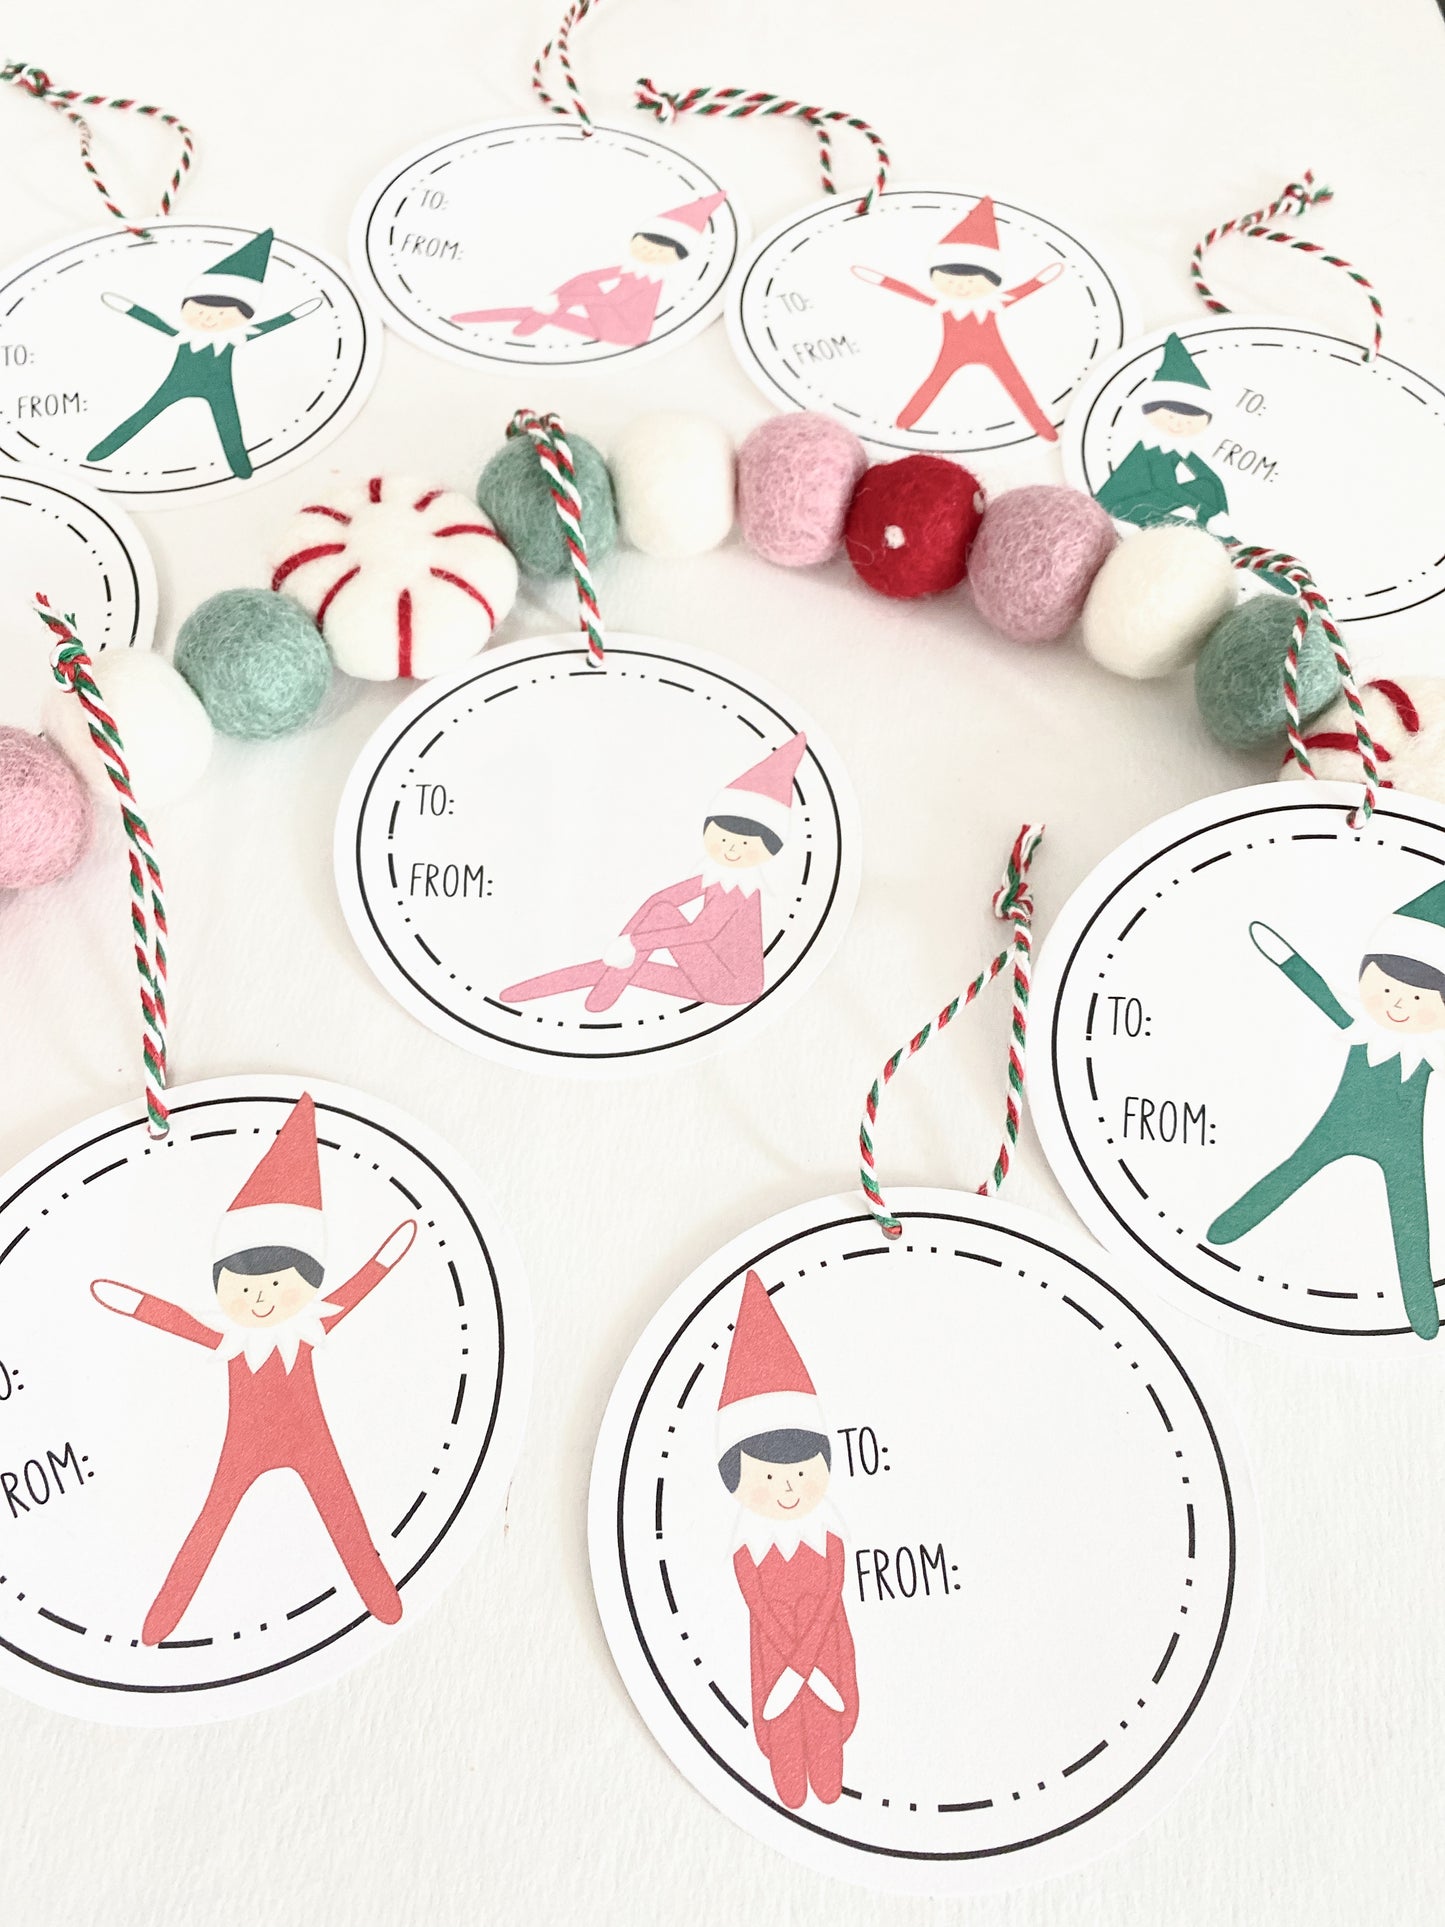 ELF ON THE GIFT TAGS